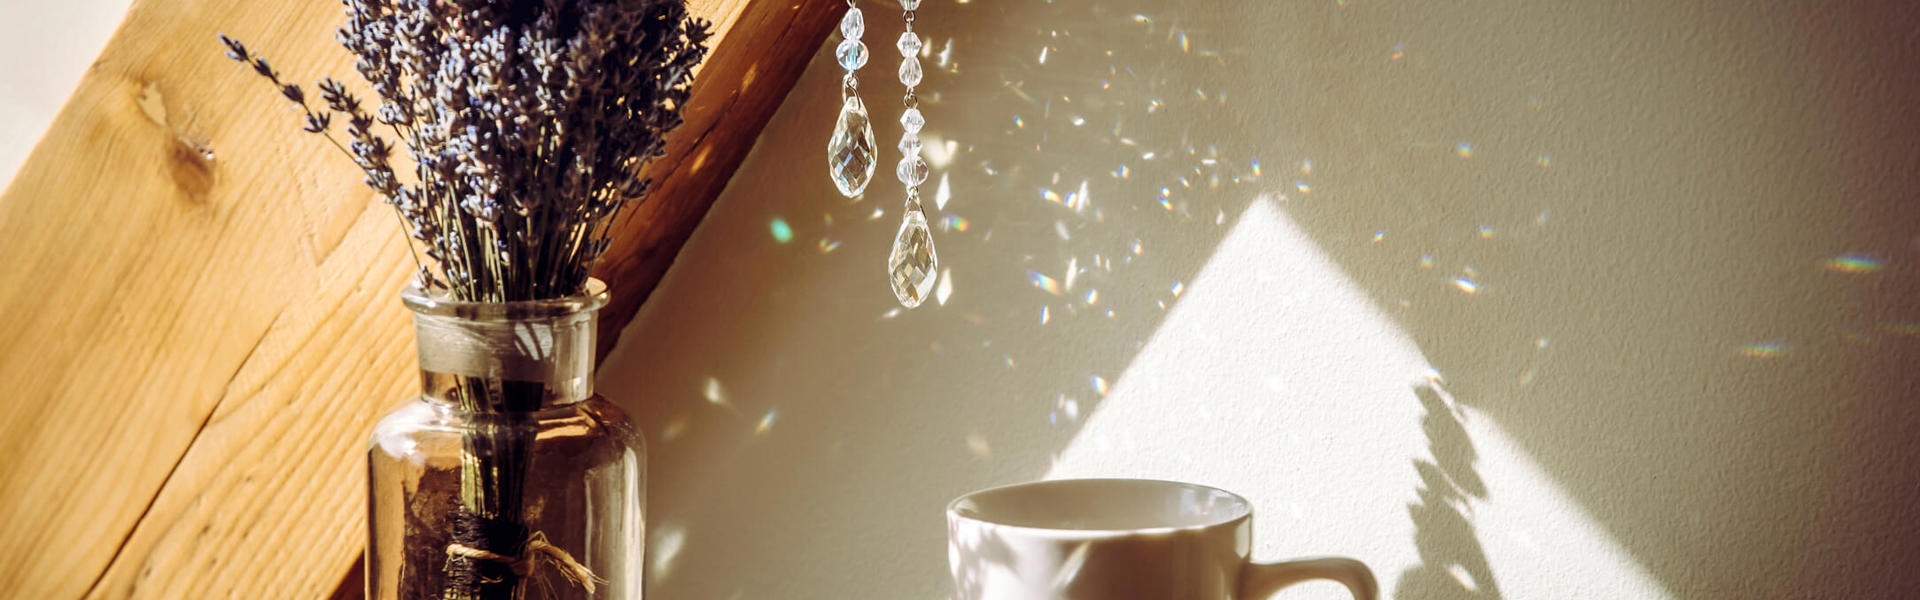 A jewelled sun catch hanging over a vase containing lavender and a white mug on a wooden table